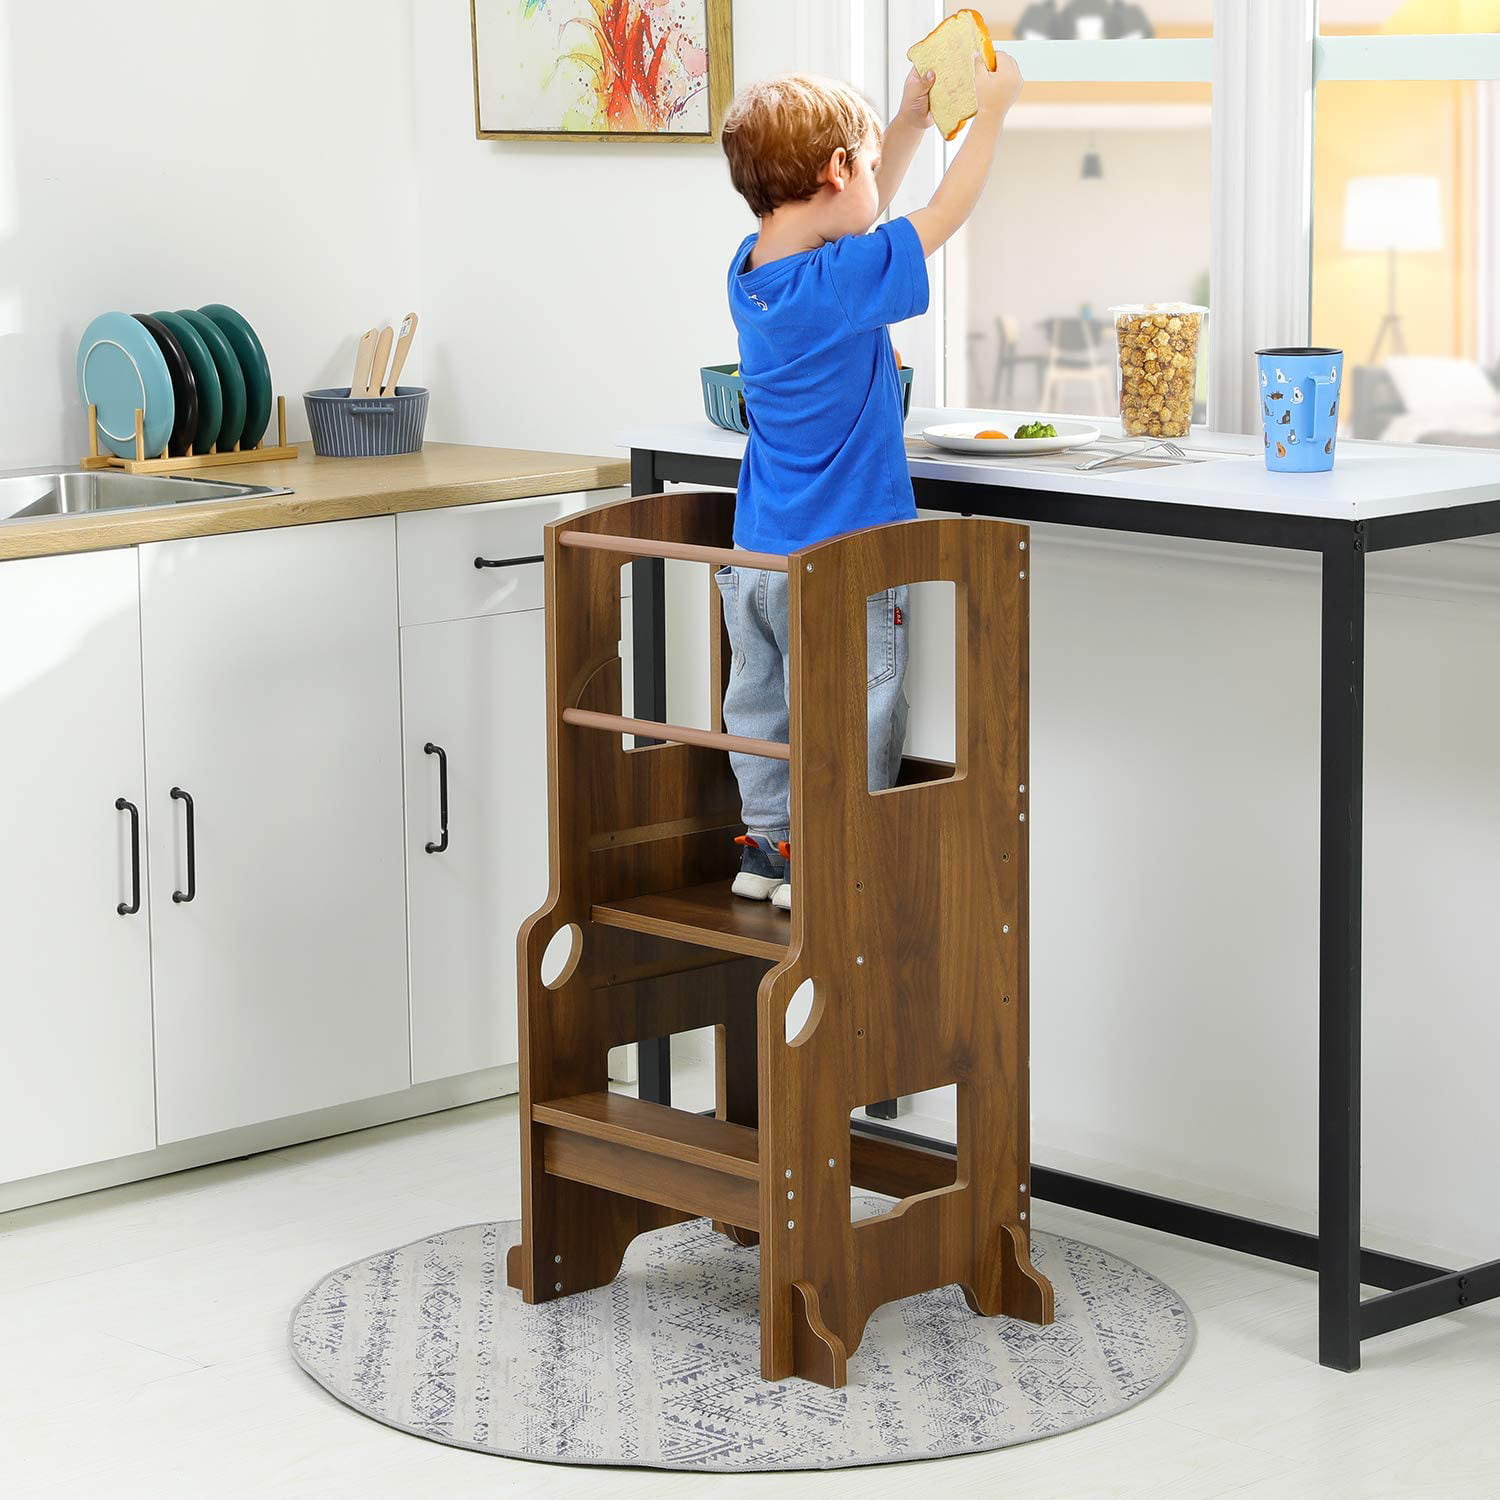 YouHi Kids Learning Stool Kitchen Helper Stool Kids Kitchen Step Stool with Three Adjustable Heights for Kids Toddlers Small Children